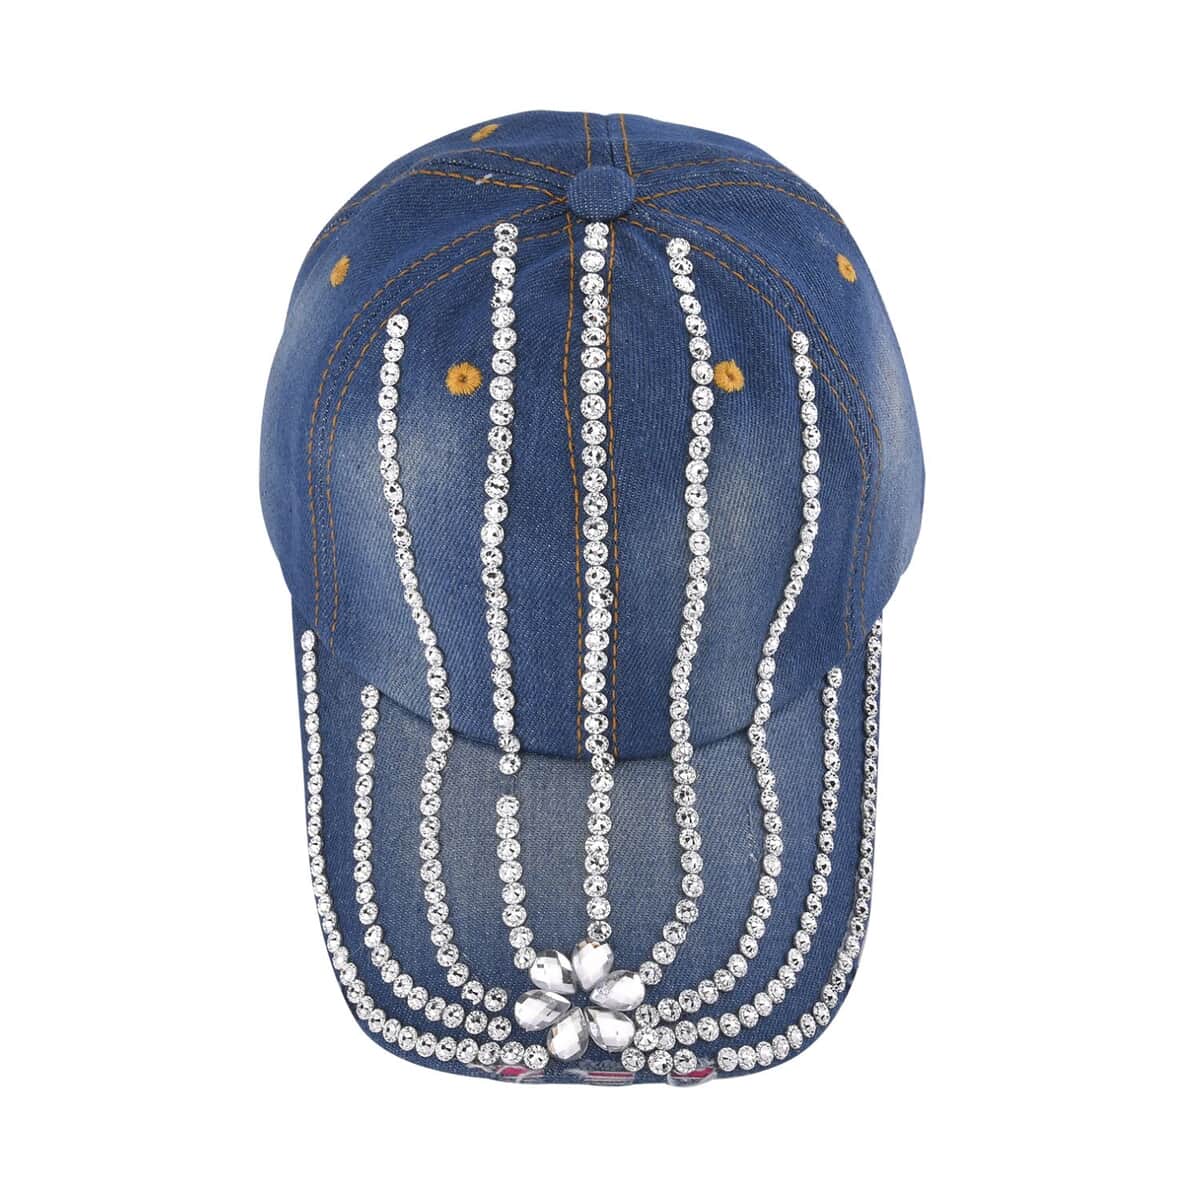 Silver Crystal Beaded Cap with Velcro Fasteners (Adjustable Strap) - Blue image number 0